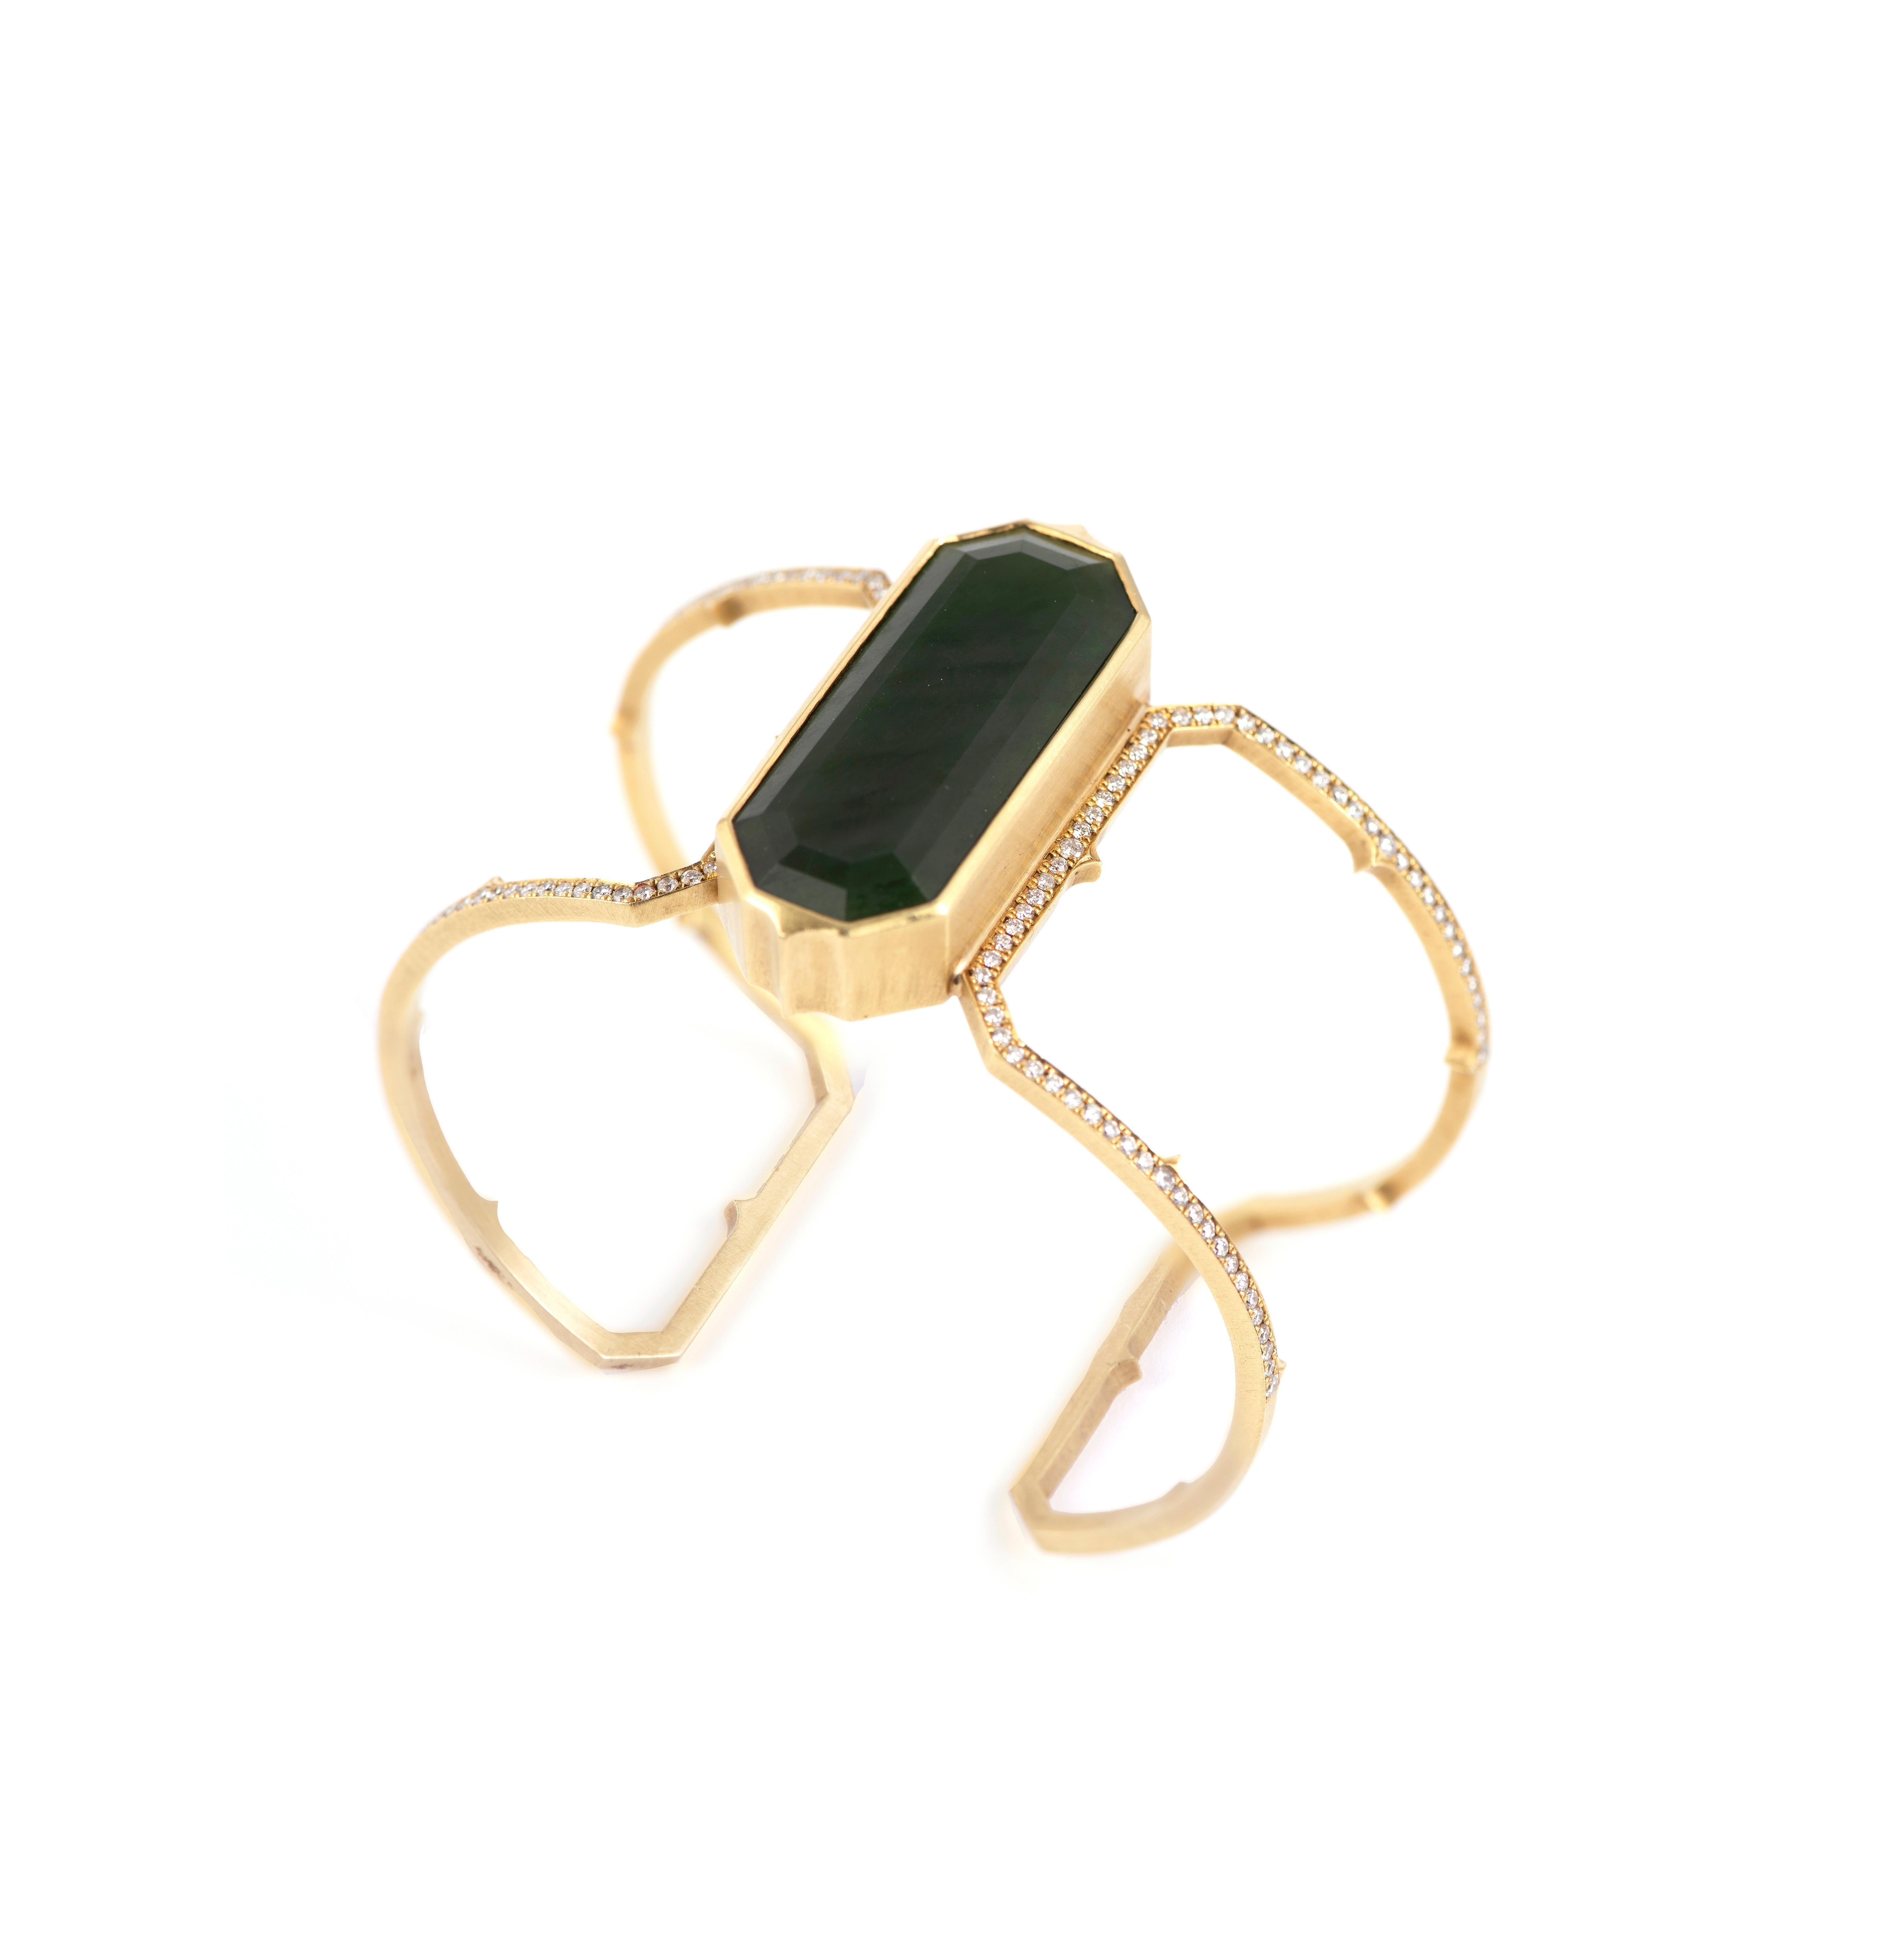 Delicate yet tough, this elegant bracelet holds a strong presence on the wrist. Deep and mysterious Nephrite Jade is paired with a dainty diamond pave set down the sides of this architectural cuff.  Also find Sylva & Cie signature thorn motifs,